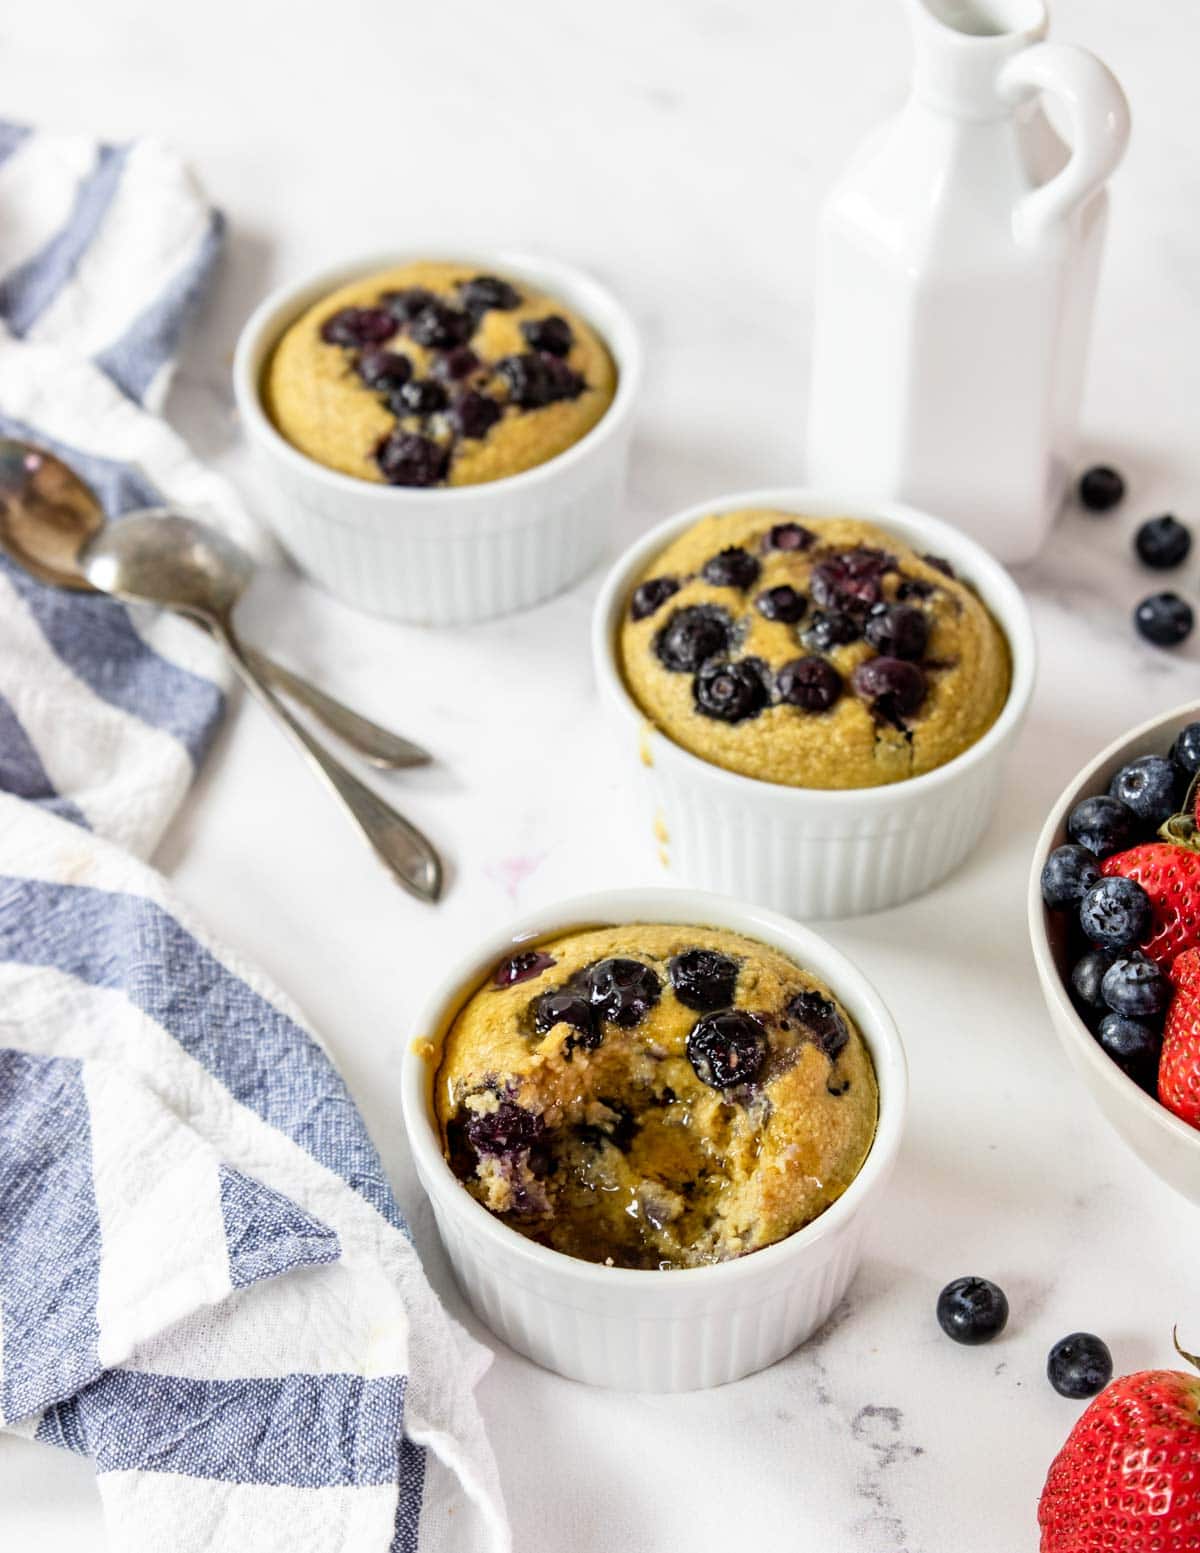 baked steel cut oats with blueberries drizzled with syrup, fresh fruit to the side